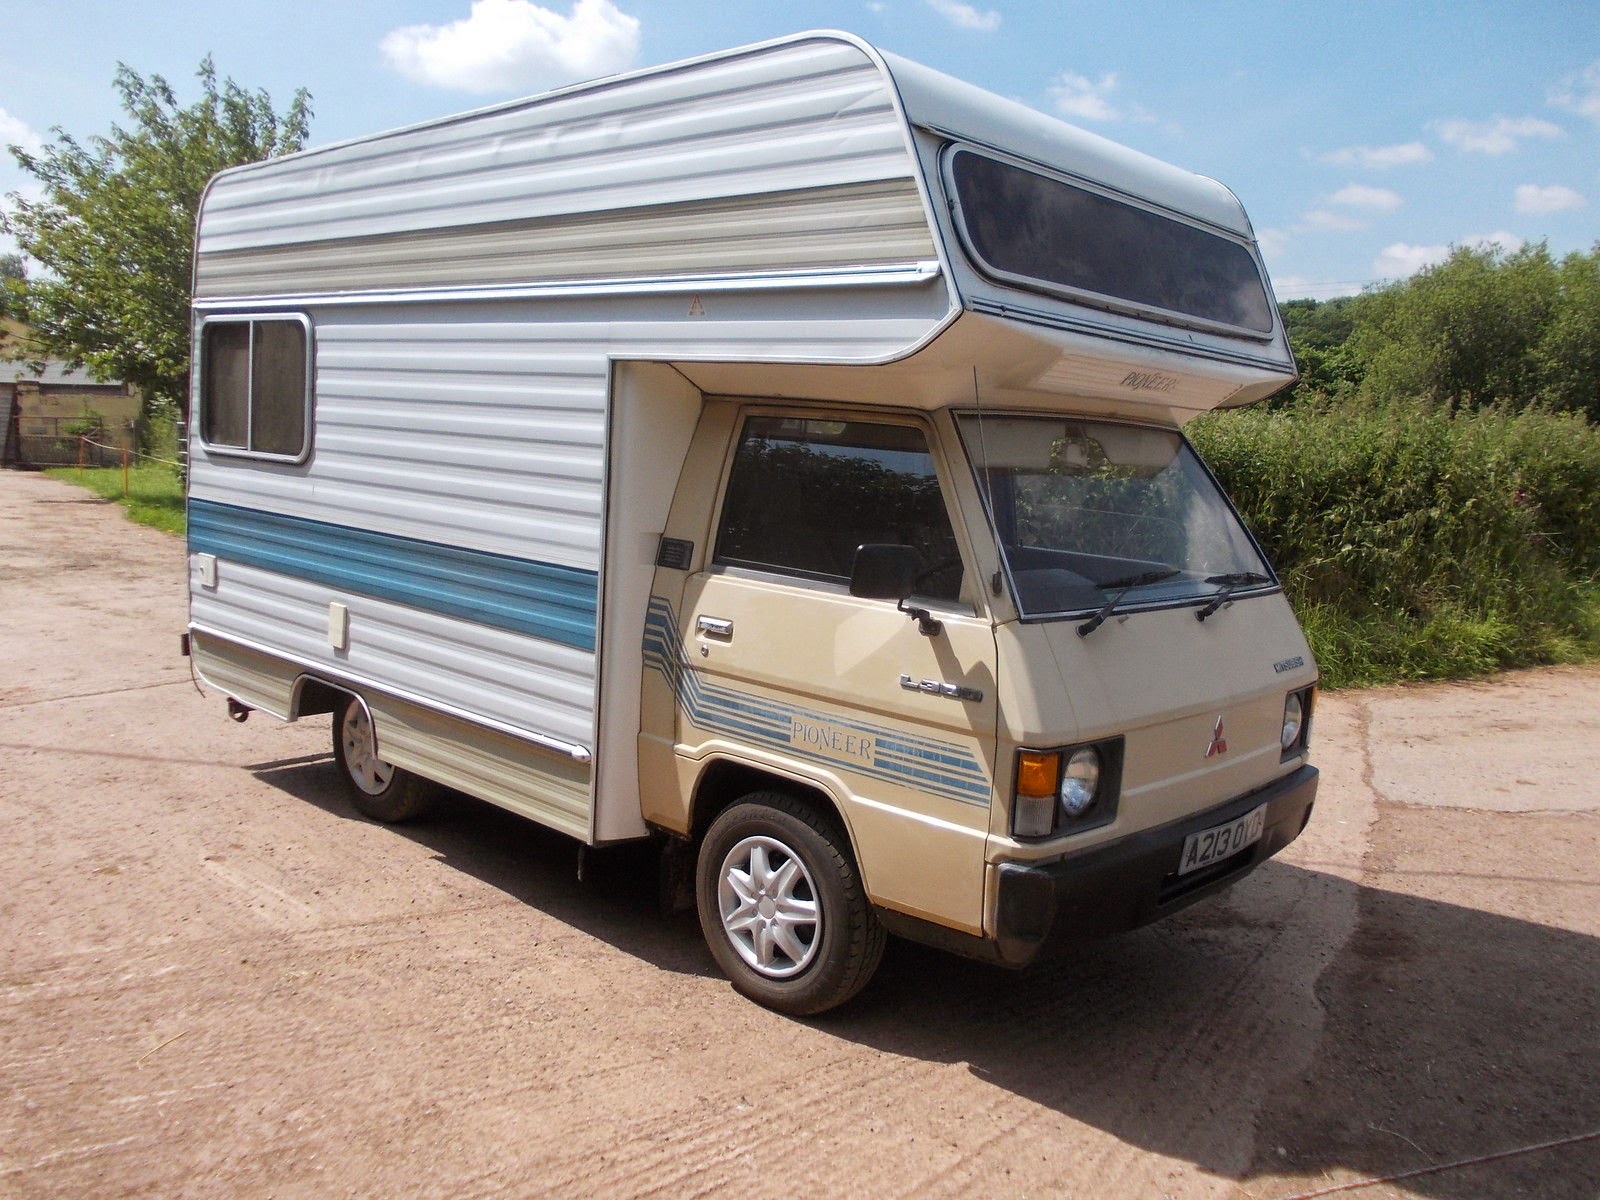 Used RVs Mitsubishi L300 Pioneer Small Motorhome For Sale by Owner Used Rv Campers For Sale By Owner